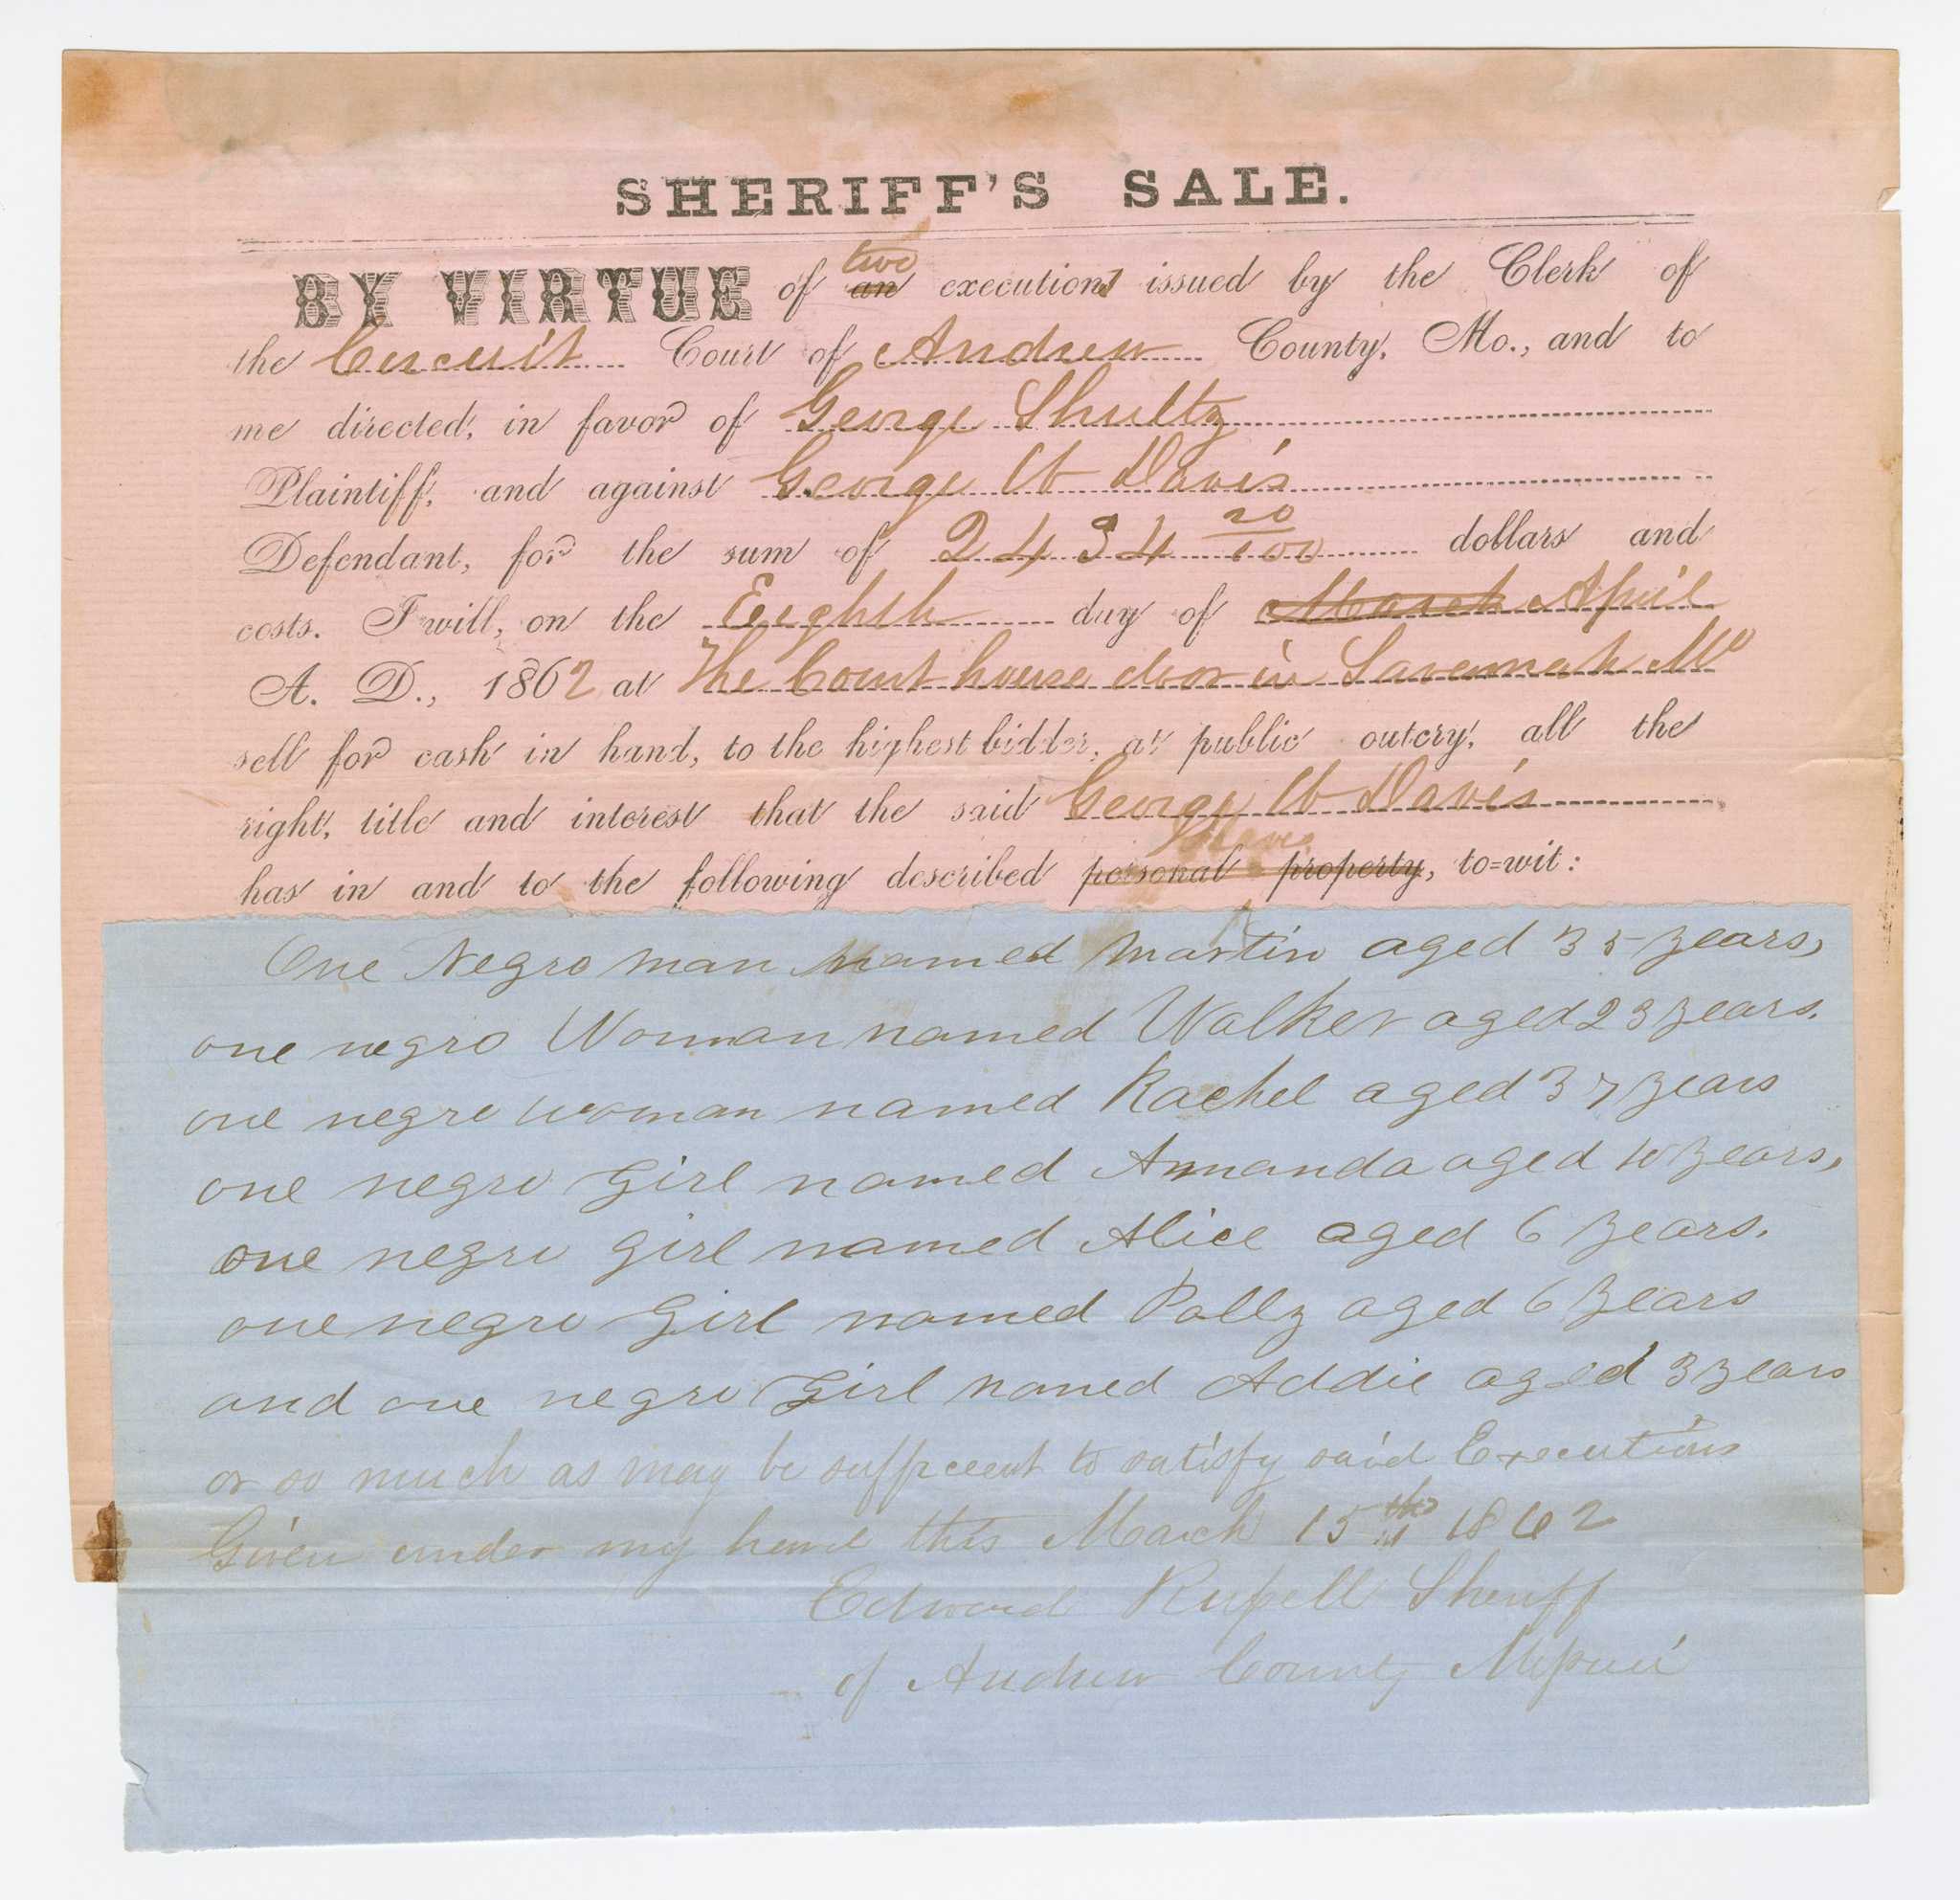 A legal notice of judgment against George W. Davis in favor of George Schultz for $2,434.20 where Andrew County, Missouri sheriff Edward Rupell announces that he will sell enslaved persons belonging to Davis to settle his debt. The document consists of a pre-printed form with [SHERIFF'S SALE.] at the top and the names, amounts, date and other details completed by hand. the list of enslaved persons is handwritten on a second sheet of blue paper adhered to the bottom of the first. The list reads: 

[One negro man named Martin aged 33 years

one negro woman named Walker aged 23 years

one negro woman named Rachel aged 37 years

one negro girl named Amanda aged 10 years

one negro girl named Alice aged 6 years

one negro girl named Polly aged 6 years

and one negro girl named Addie aged 3 years]

The document is signed [Edward Rupell Sheriff of Andrew County Missouri].